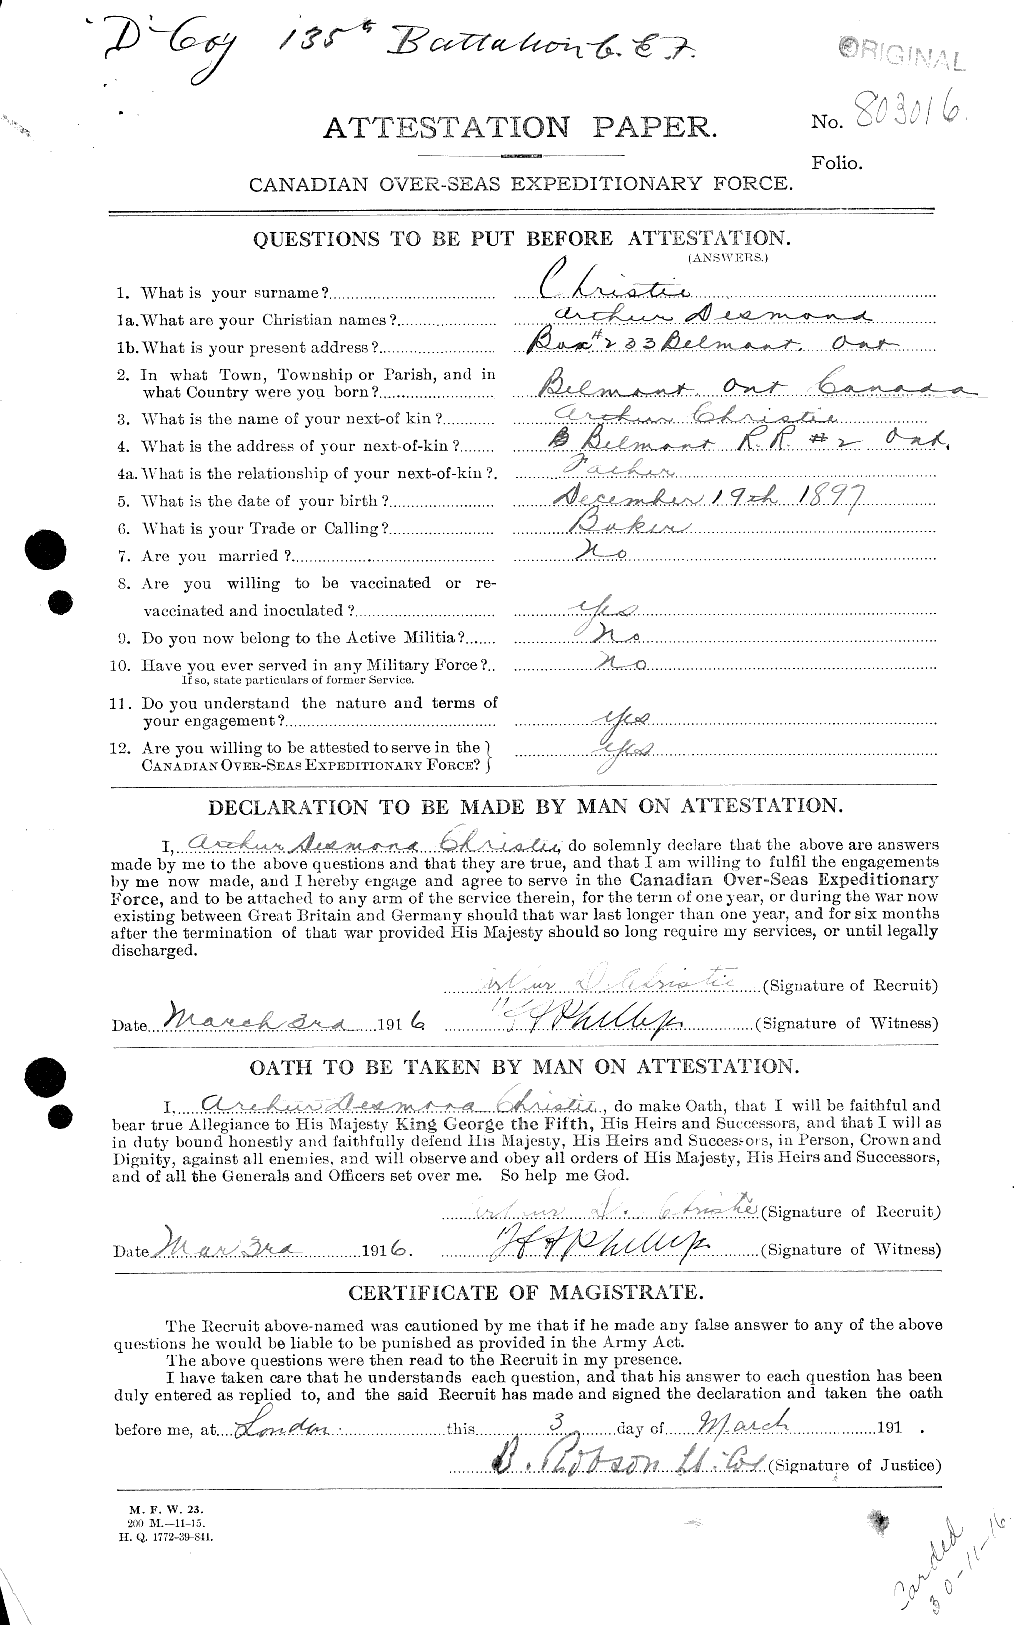 Personnel Records of the First World War - CEF 021881a